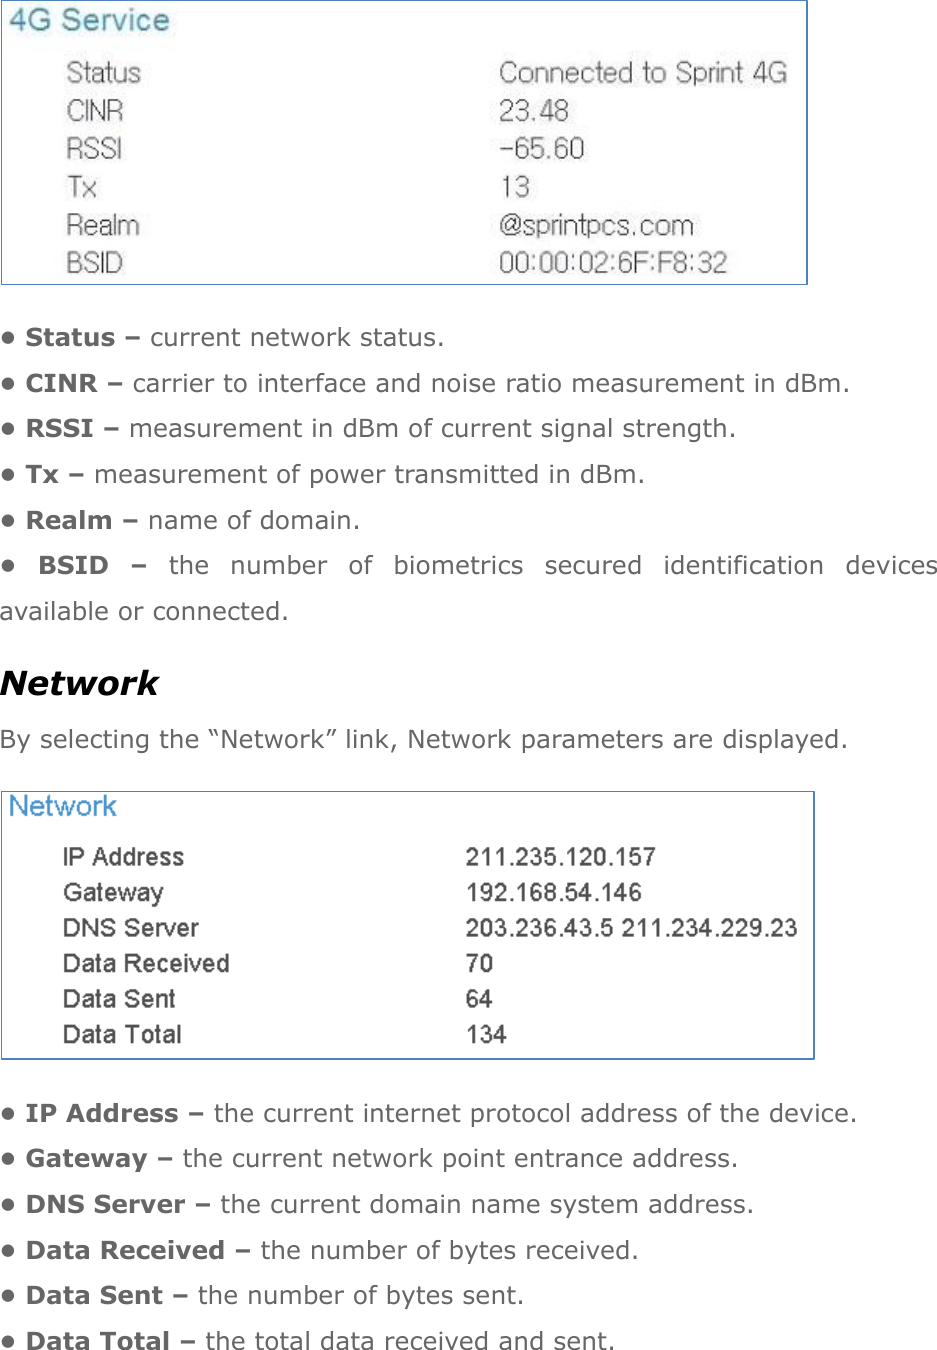  • Status – current network status. • CINR – carrier to interface and noise ratio measurement in dBm. • RSSI – measurement in dBm of current signal strength. • Tx – measurement of power transmitted in dBm. • Realm – name of domain. •  BSID  – the  number  of  biometrics  secured  identification  devices available or connected. Network By selecting the “Network” link, Network parameters are displayed.  • IP Address – the current internet protocol address of the device. • Gateway – the current network point entrance address. • DNS Server – the current domain name system address. • Data Received – the number of bytes received. • Data Sent – the number of bytes sent. • Data Total – the total data received and sent. 